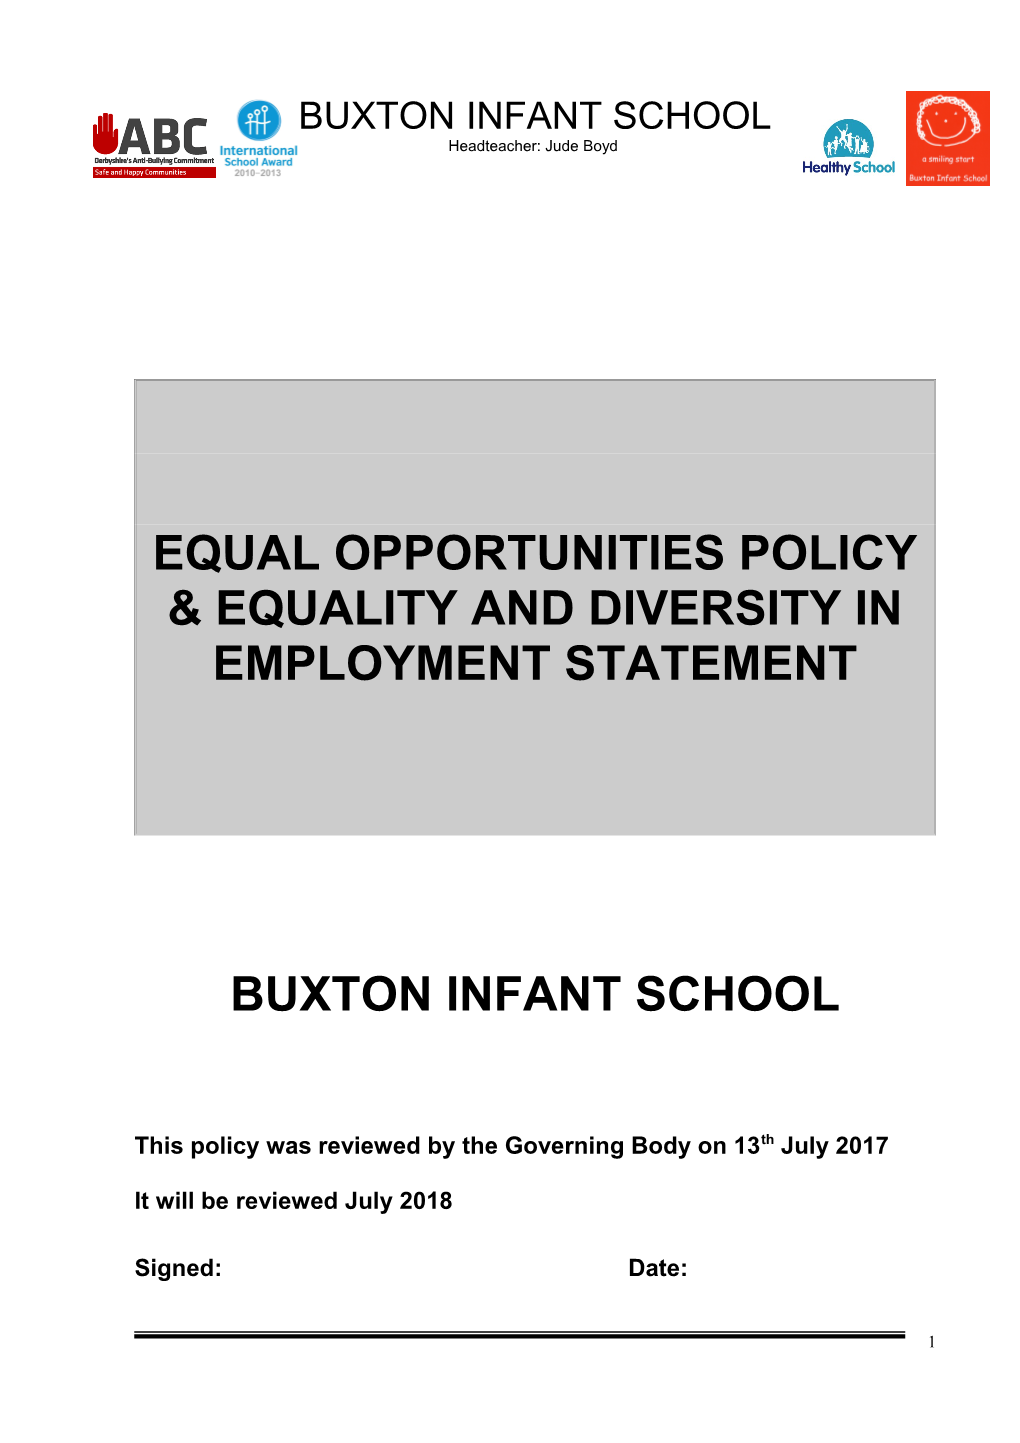 Equal Opportunities Policy & Equality and Diversity in Employment Statement